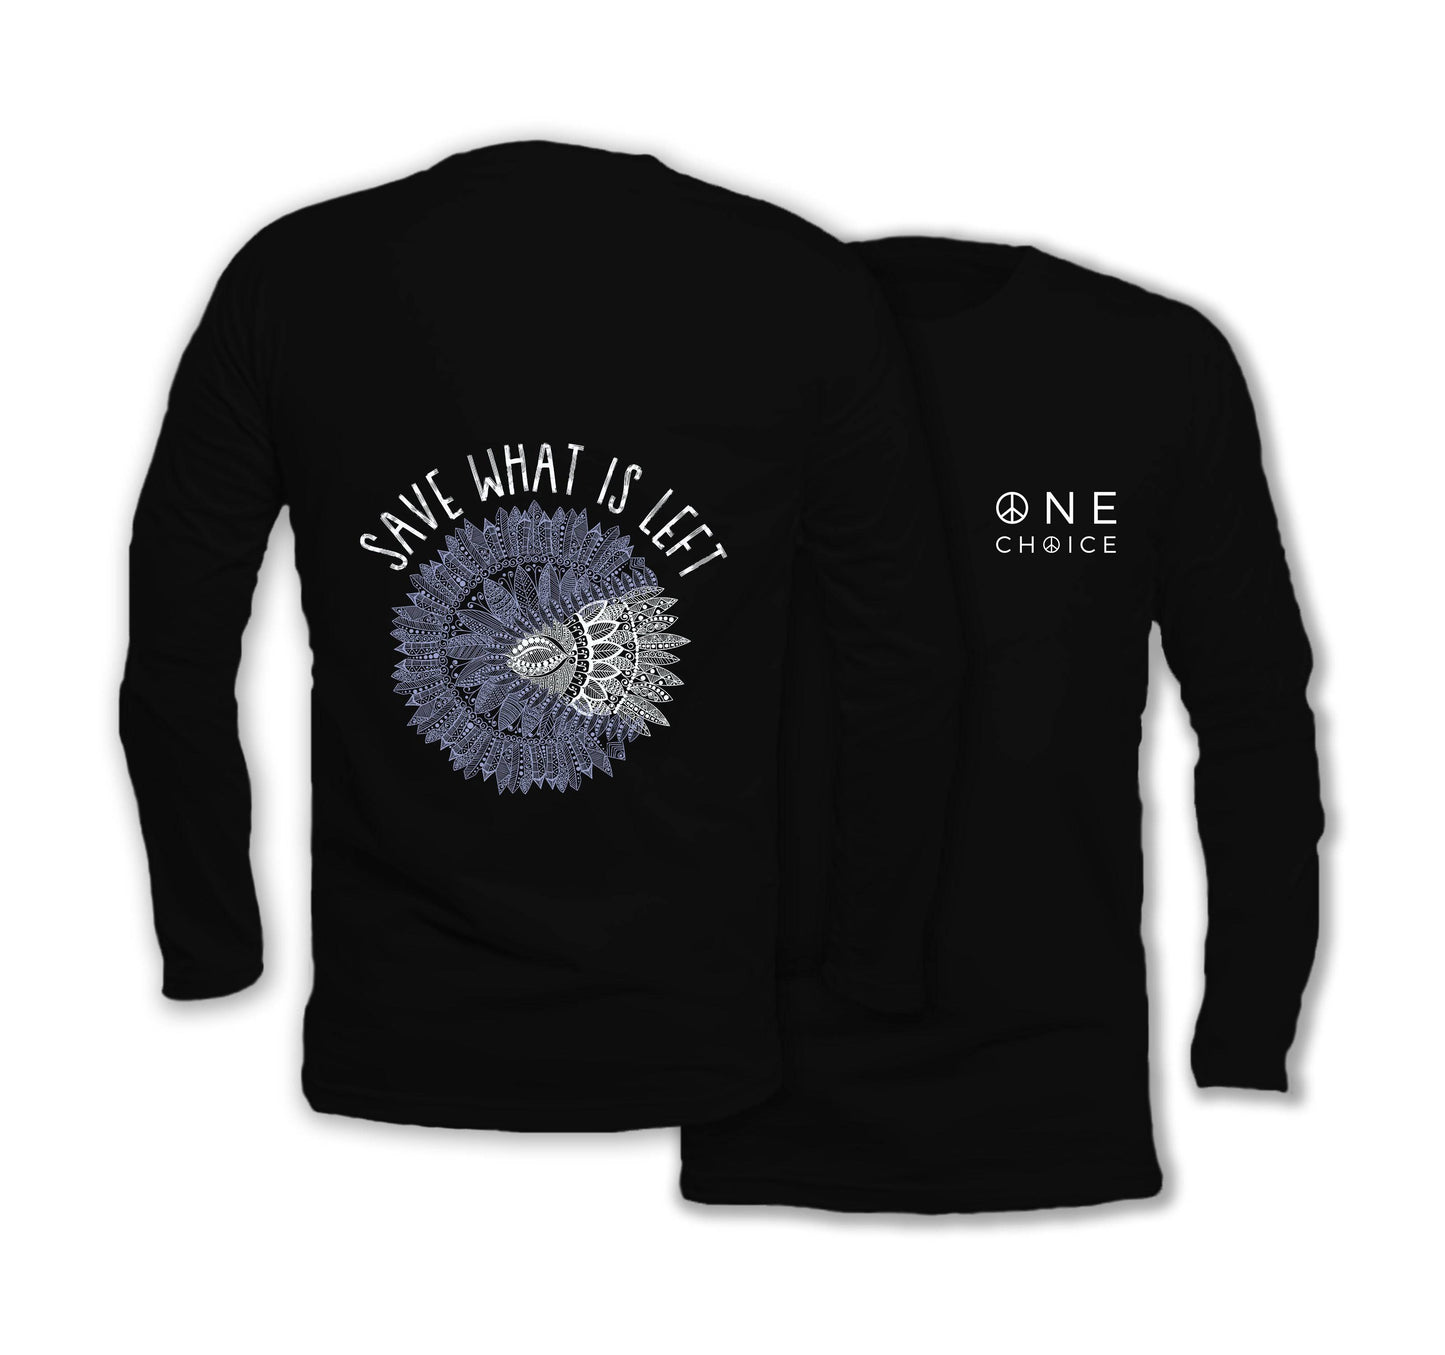 Save What's Left - Long Sleeve Organic Cotton T-Shirt - One Choice Apparel